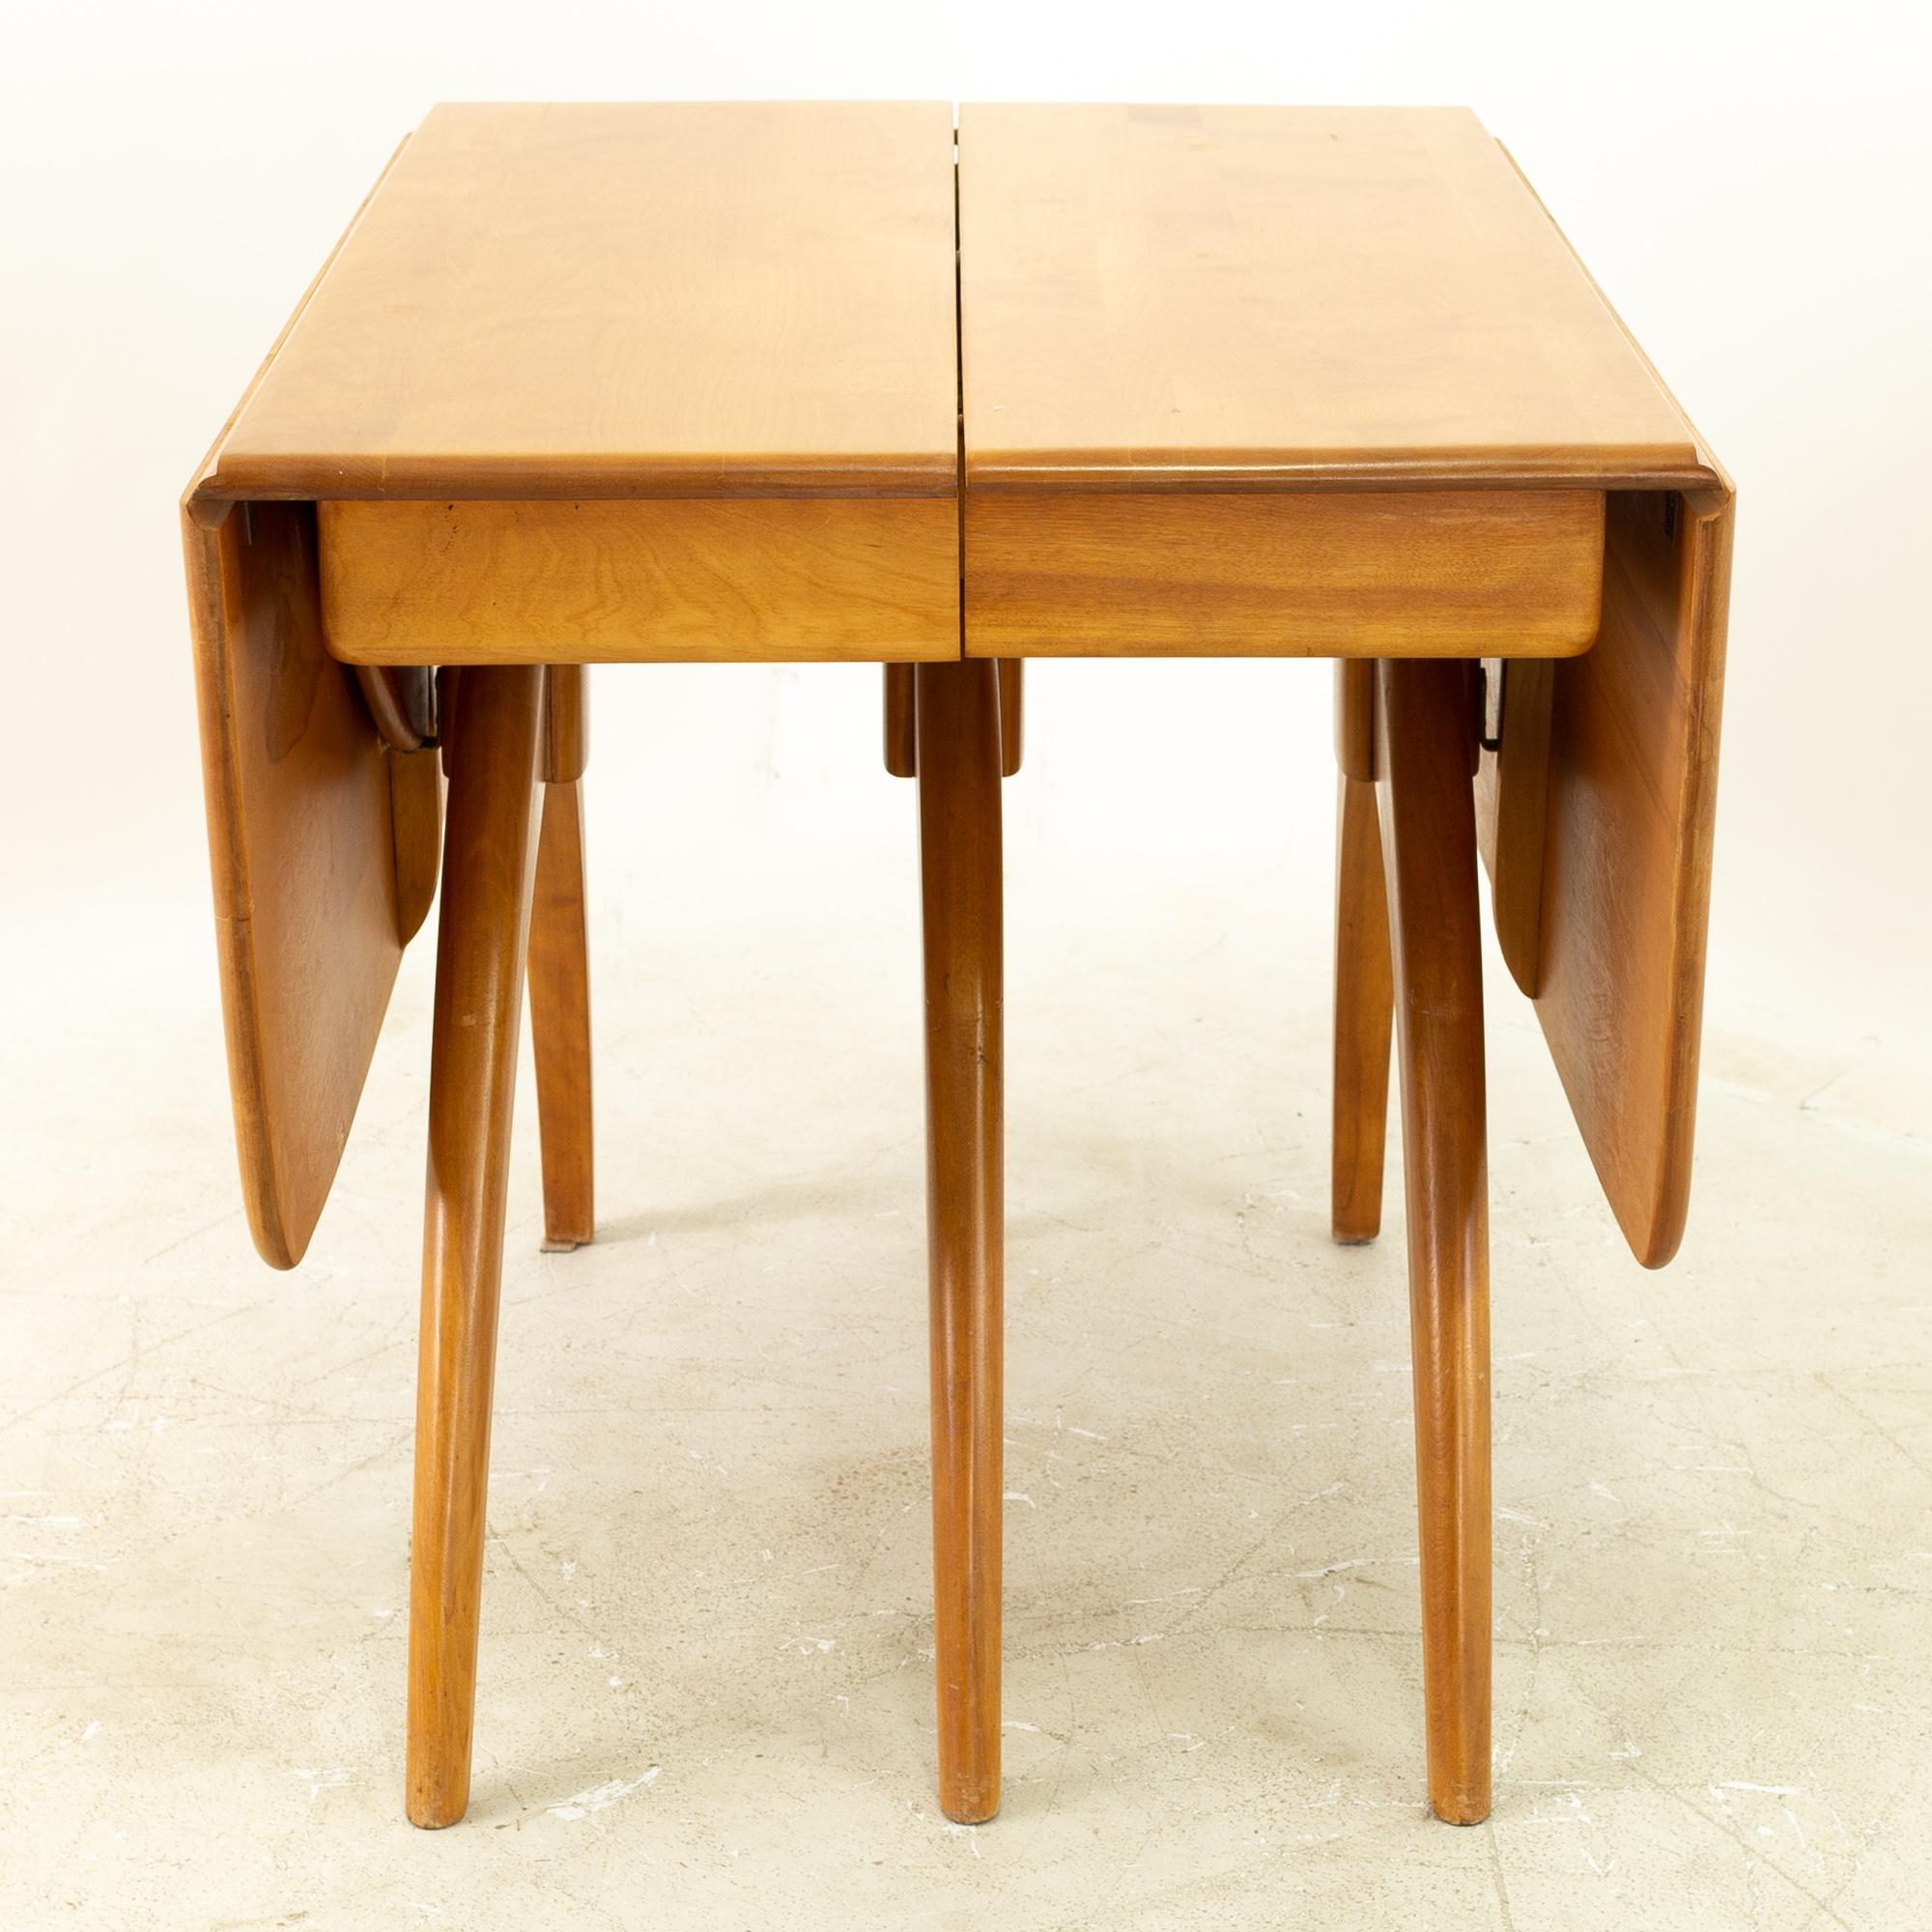 Heywood Wakefield mid century maple wishbone expanding dining table 

This table measures 58 wide x 40 deep x 28.75 inches high and is 92 inches wide when expanded

All pieces of furniture can be had in what we call restored vintage condition.